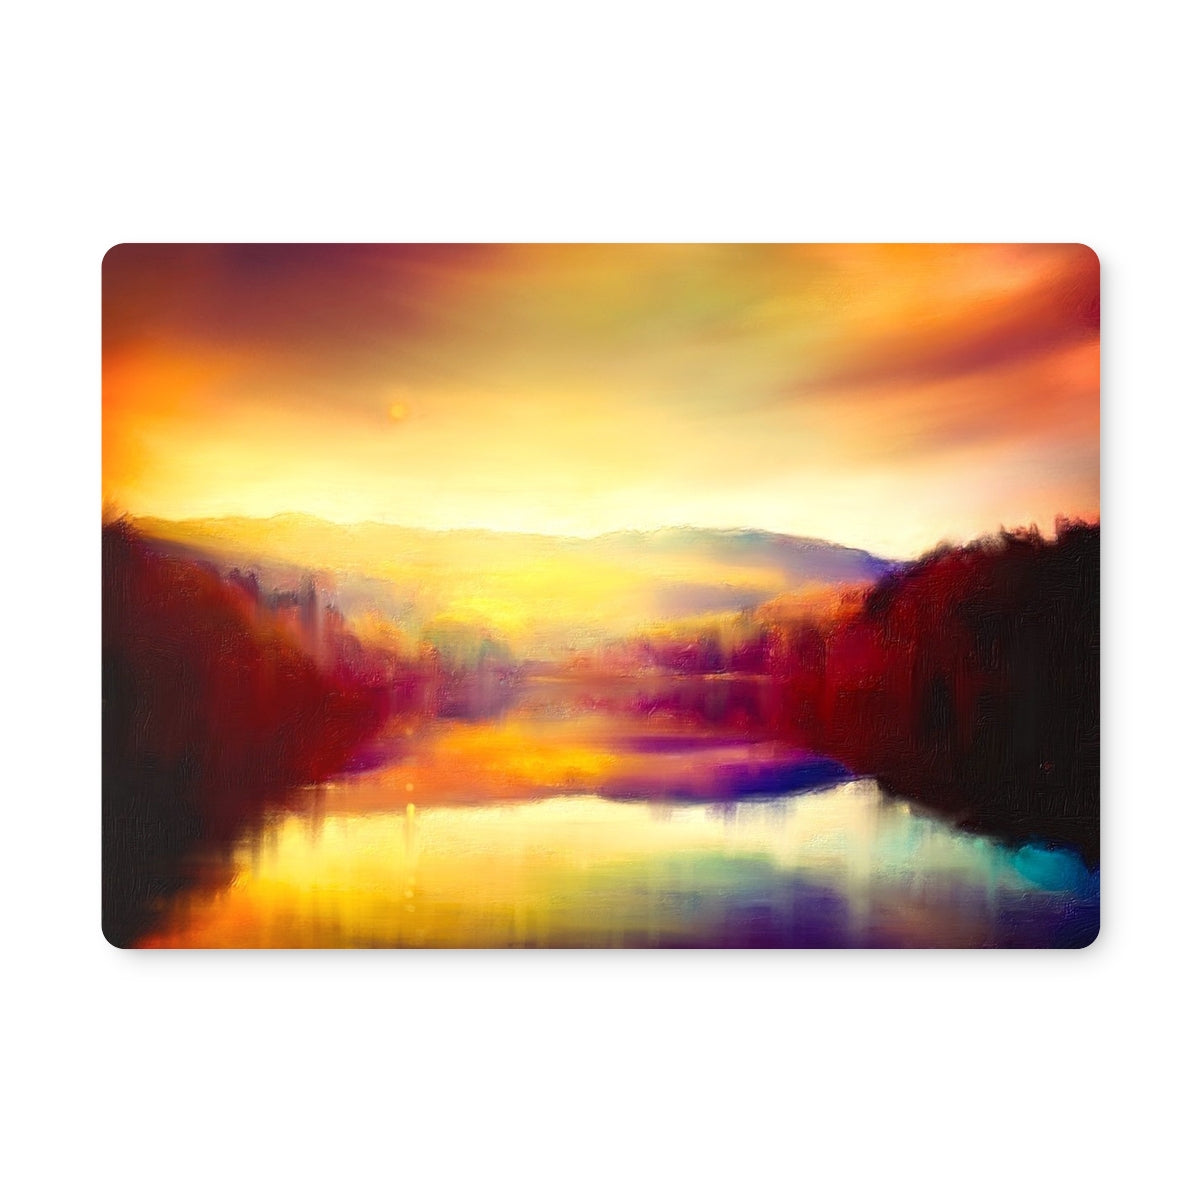 Loch Faskally Dusk Art Gifts Placemat-Placemats-Scottish Lochs & Mountains Art Gallery-2 Placemats-Paintings, Prints, Homeware, Art Gifts From Scotland By Scottish Artist Kevin Hunter